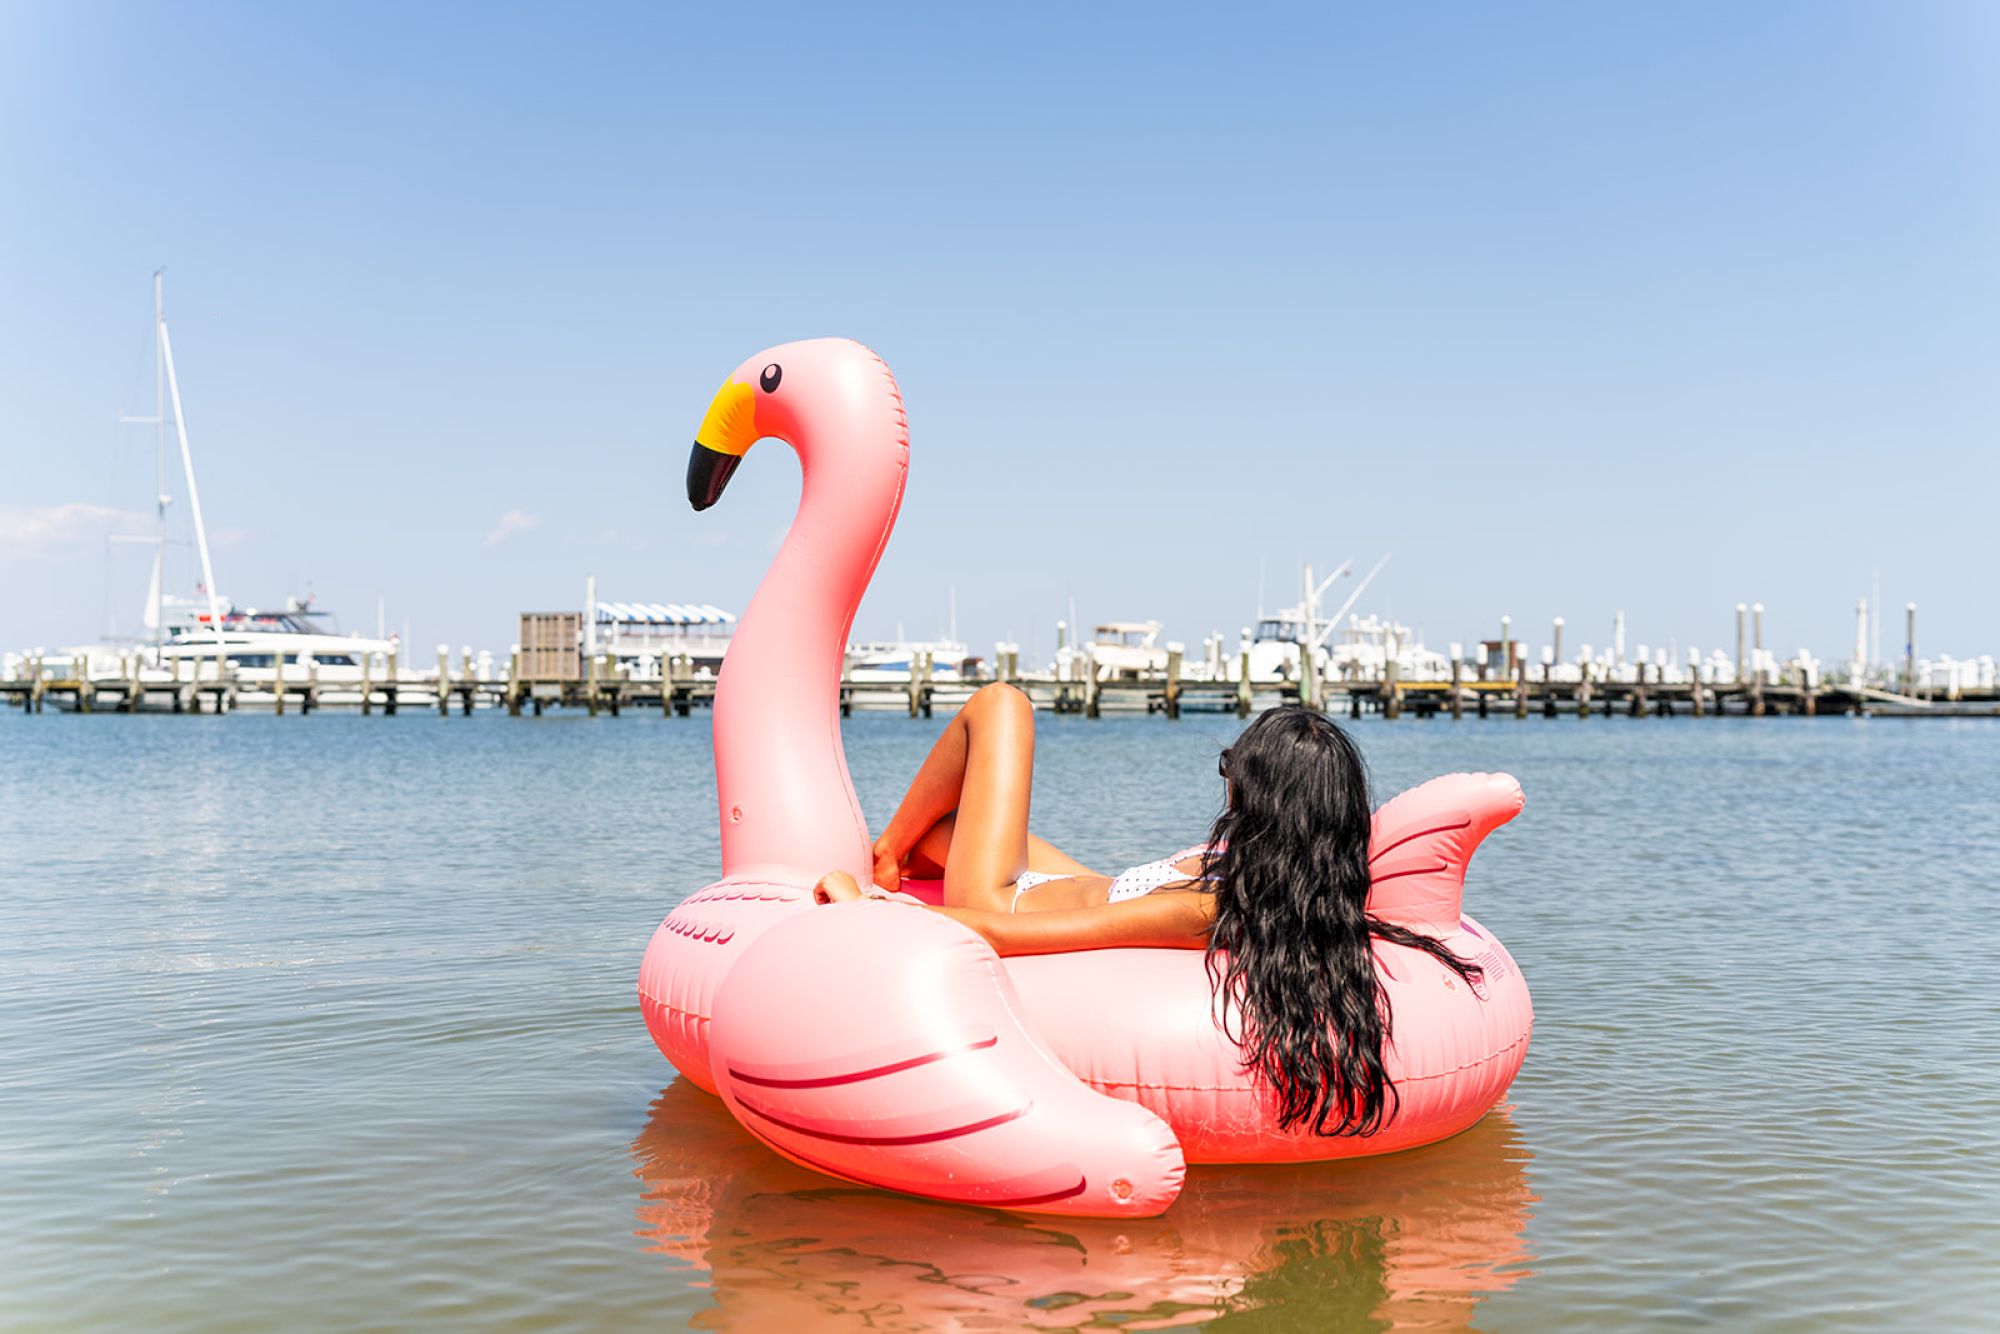 A person lounges on a large pink flamingo float in a calm body of water with boats docked in the background under a clear blue sky.